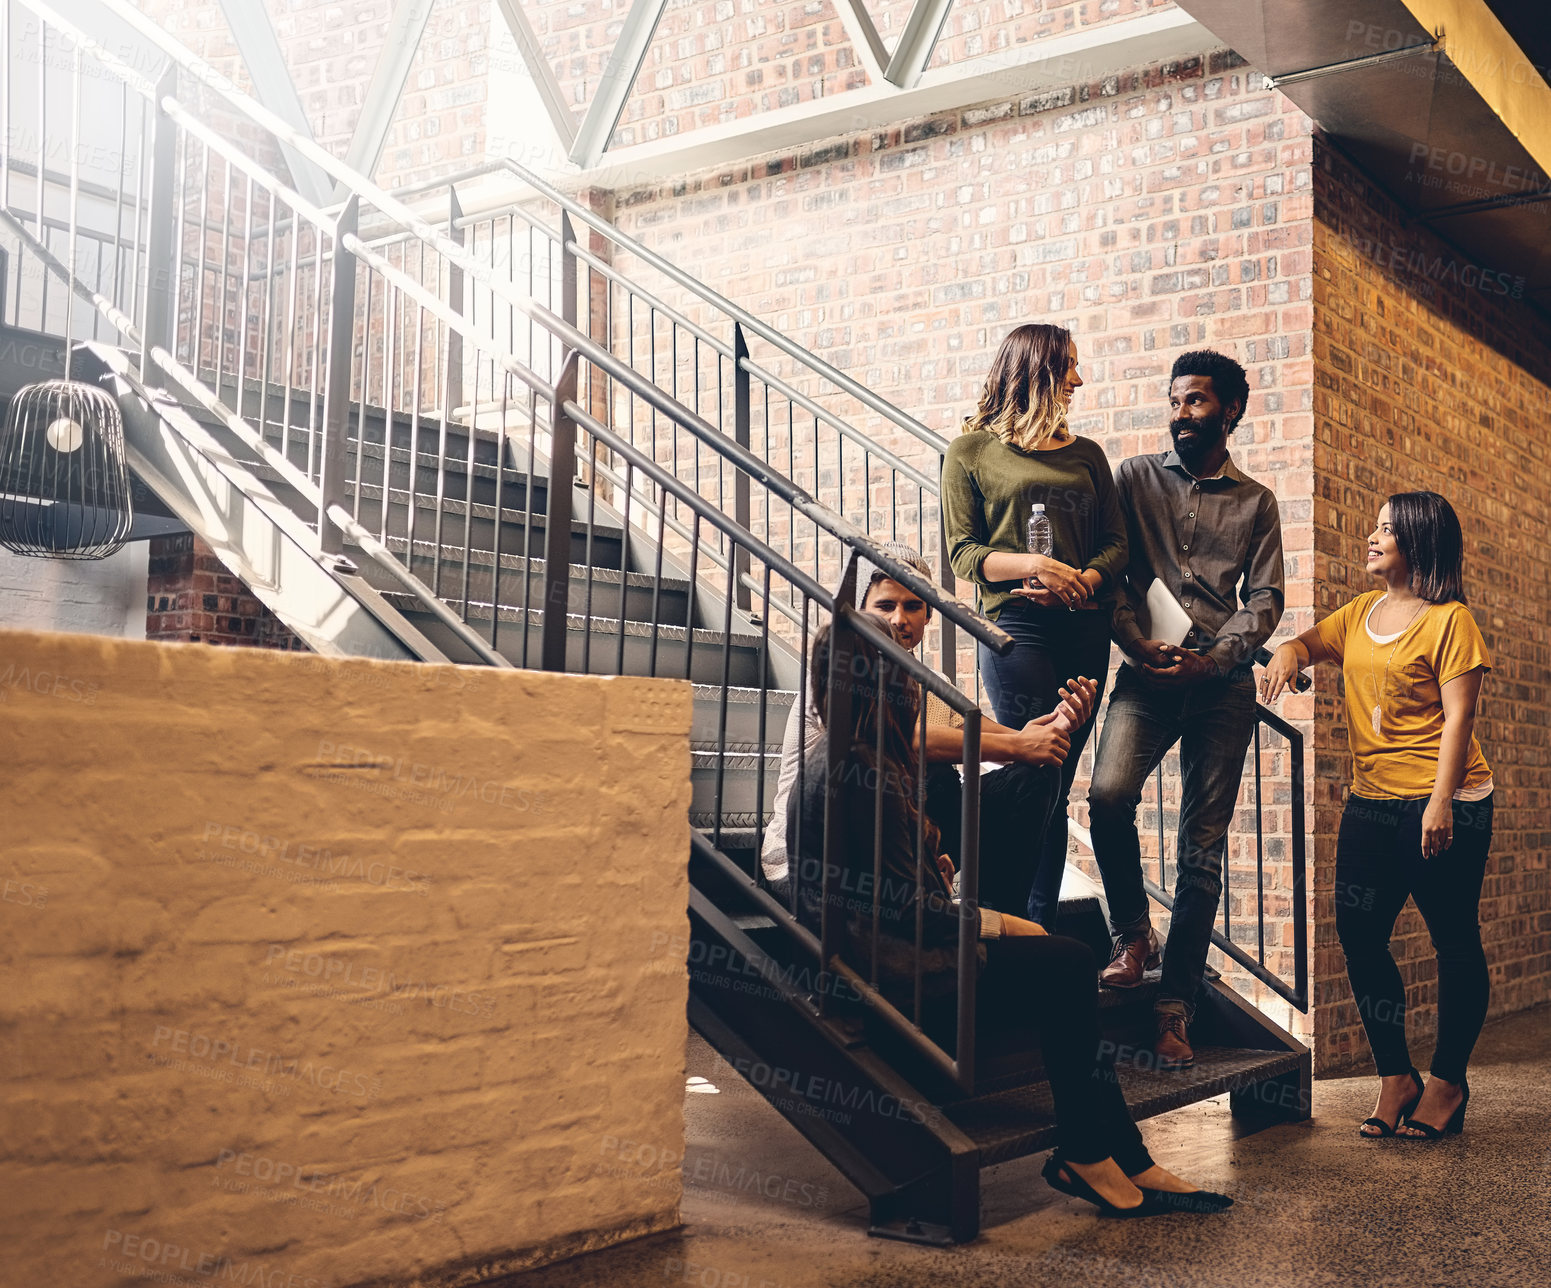 Buy stock photo Full length shot of a group of young designers gathered in a stairwell at the office